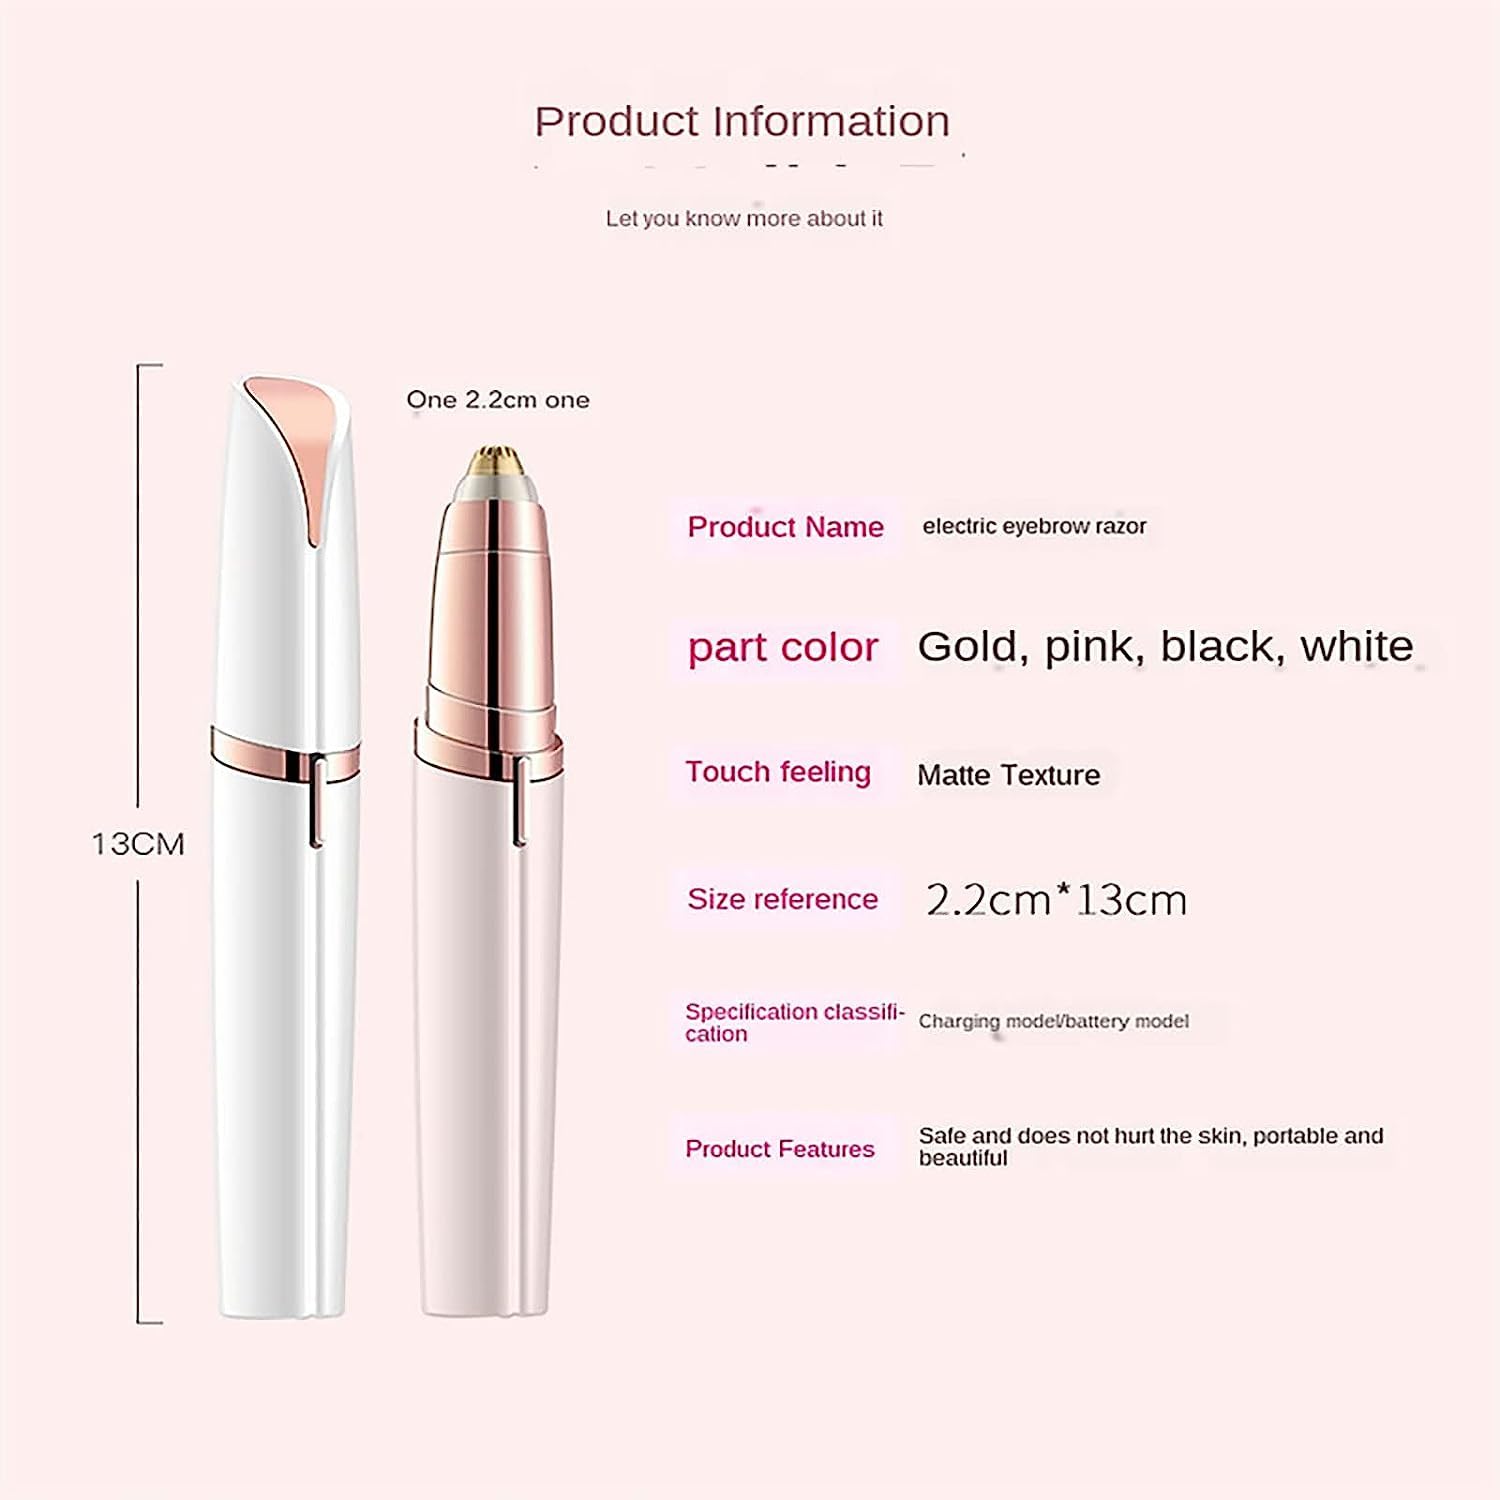 VIO Facial Women Hair Remover and Eyebrow Trimmer, Painless Precision Portable Razor for Face, Rechargeable Lipstick Style Trimmer for Lips, Nose, Chin and Facial Hair (Eyebrow Trimmer)